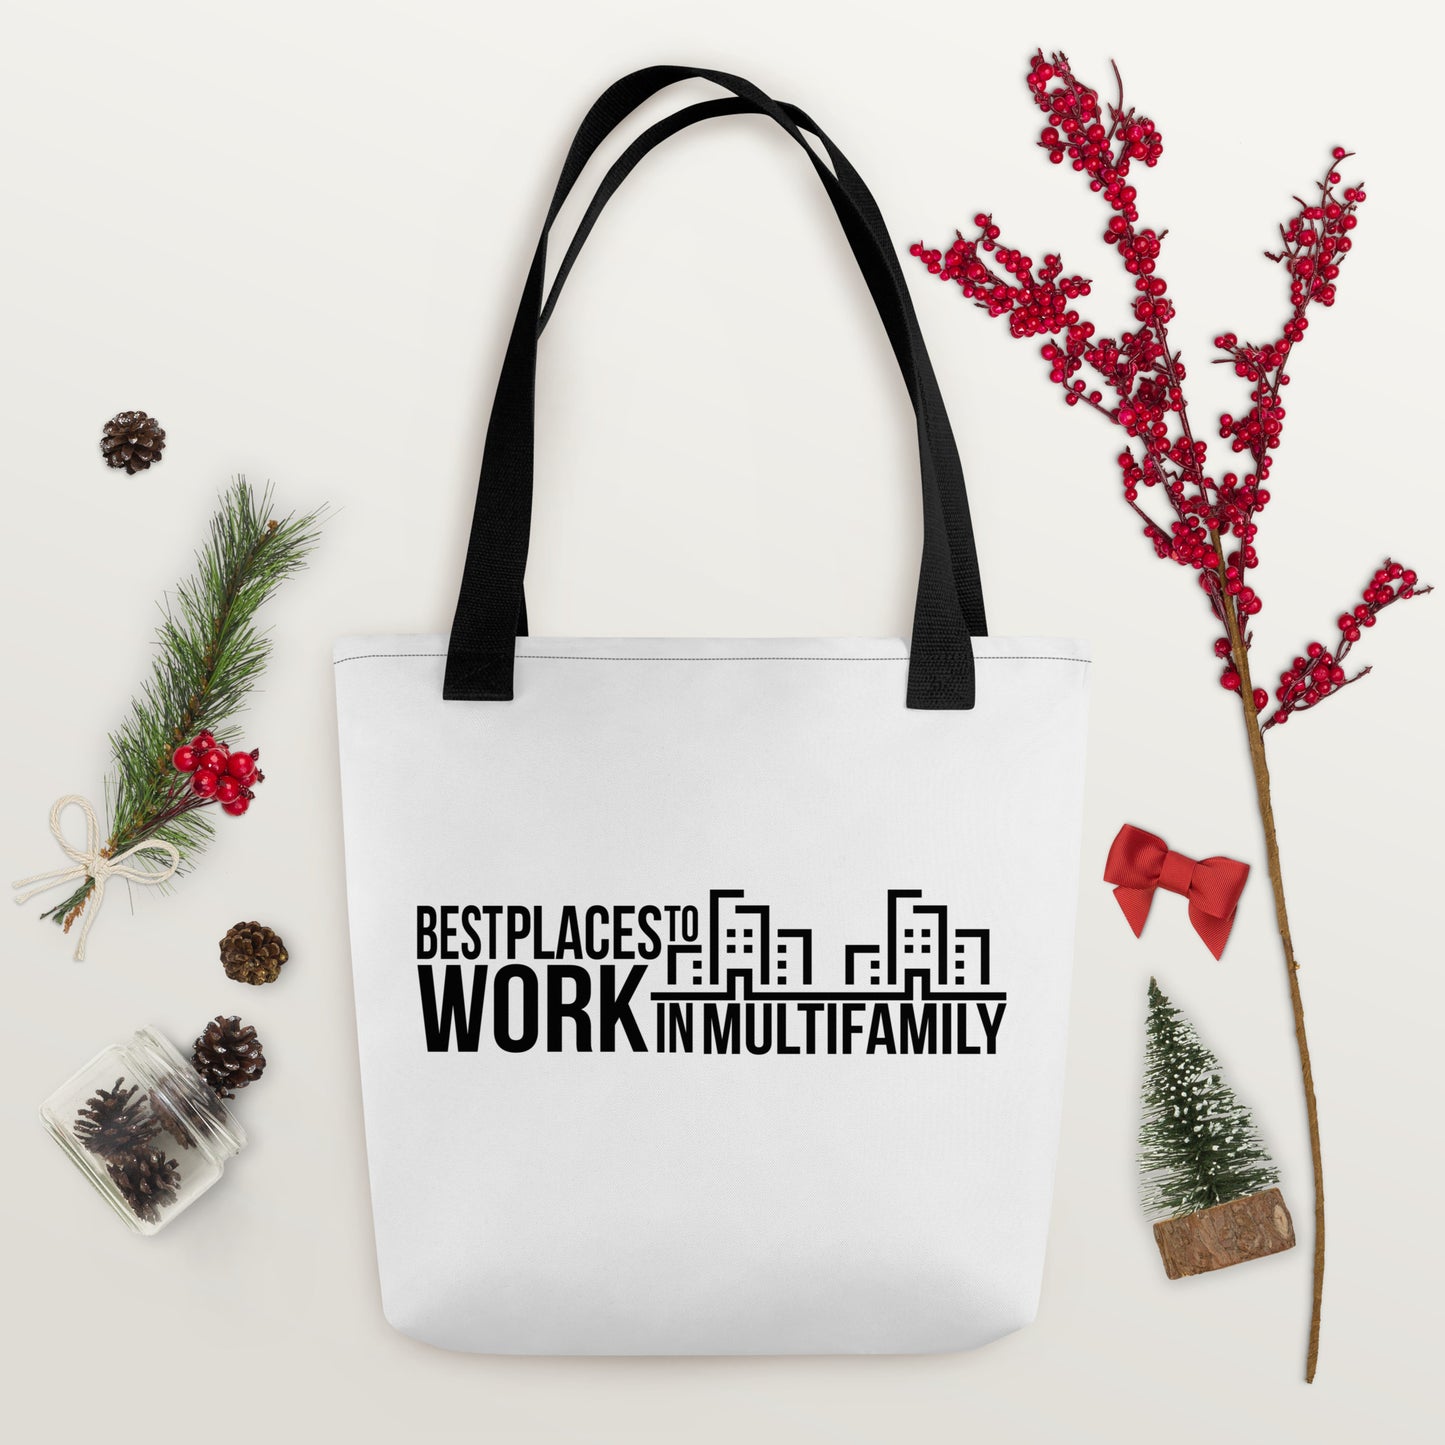 Best Places to Work Multifamily® Tote bag